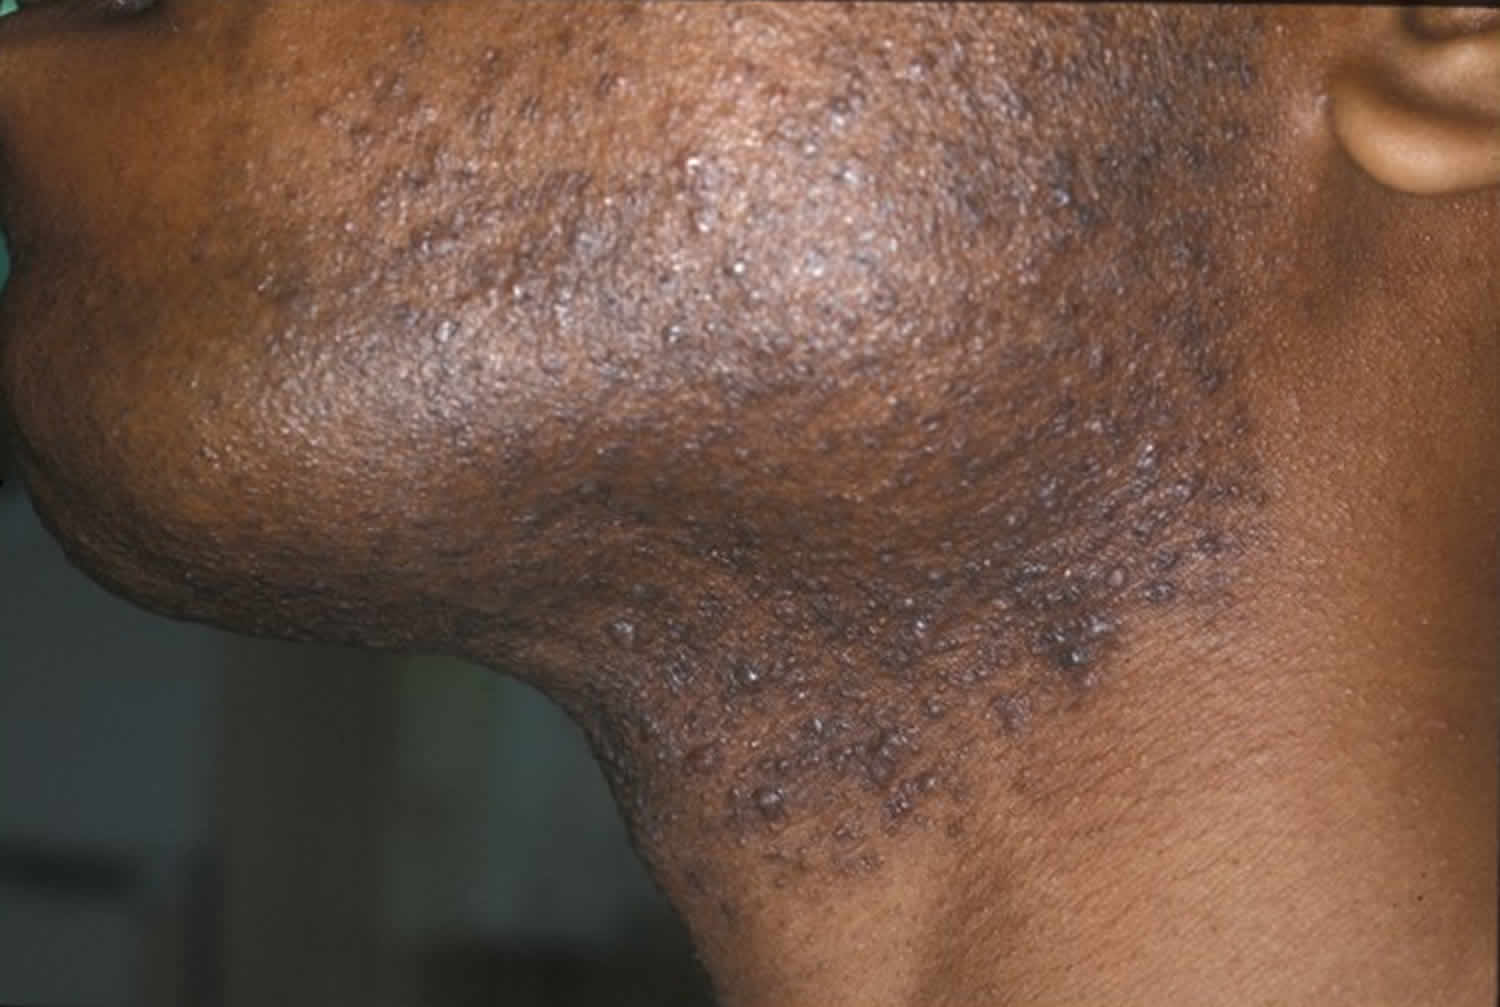 Razor bumps causes, prevention & learn how to get rid of razor bumps